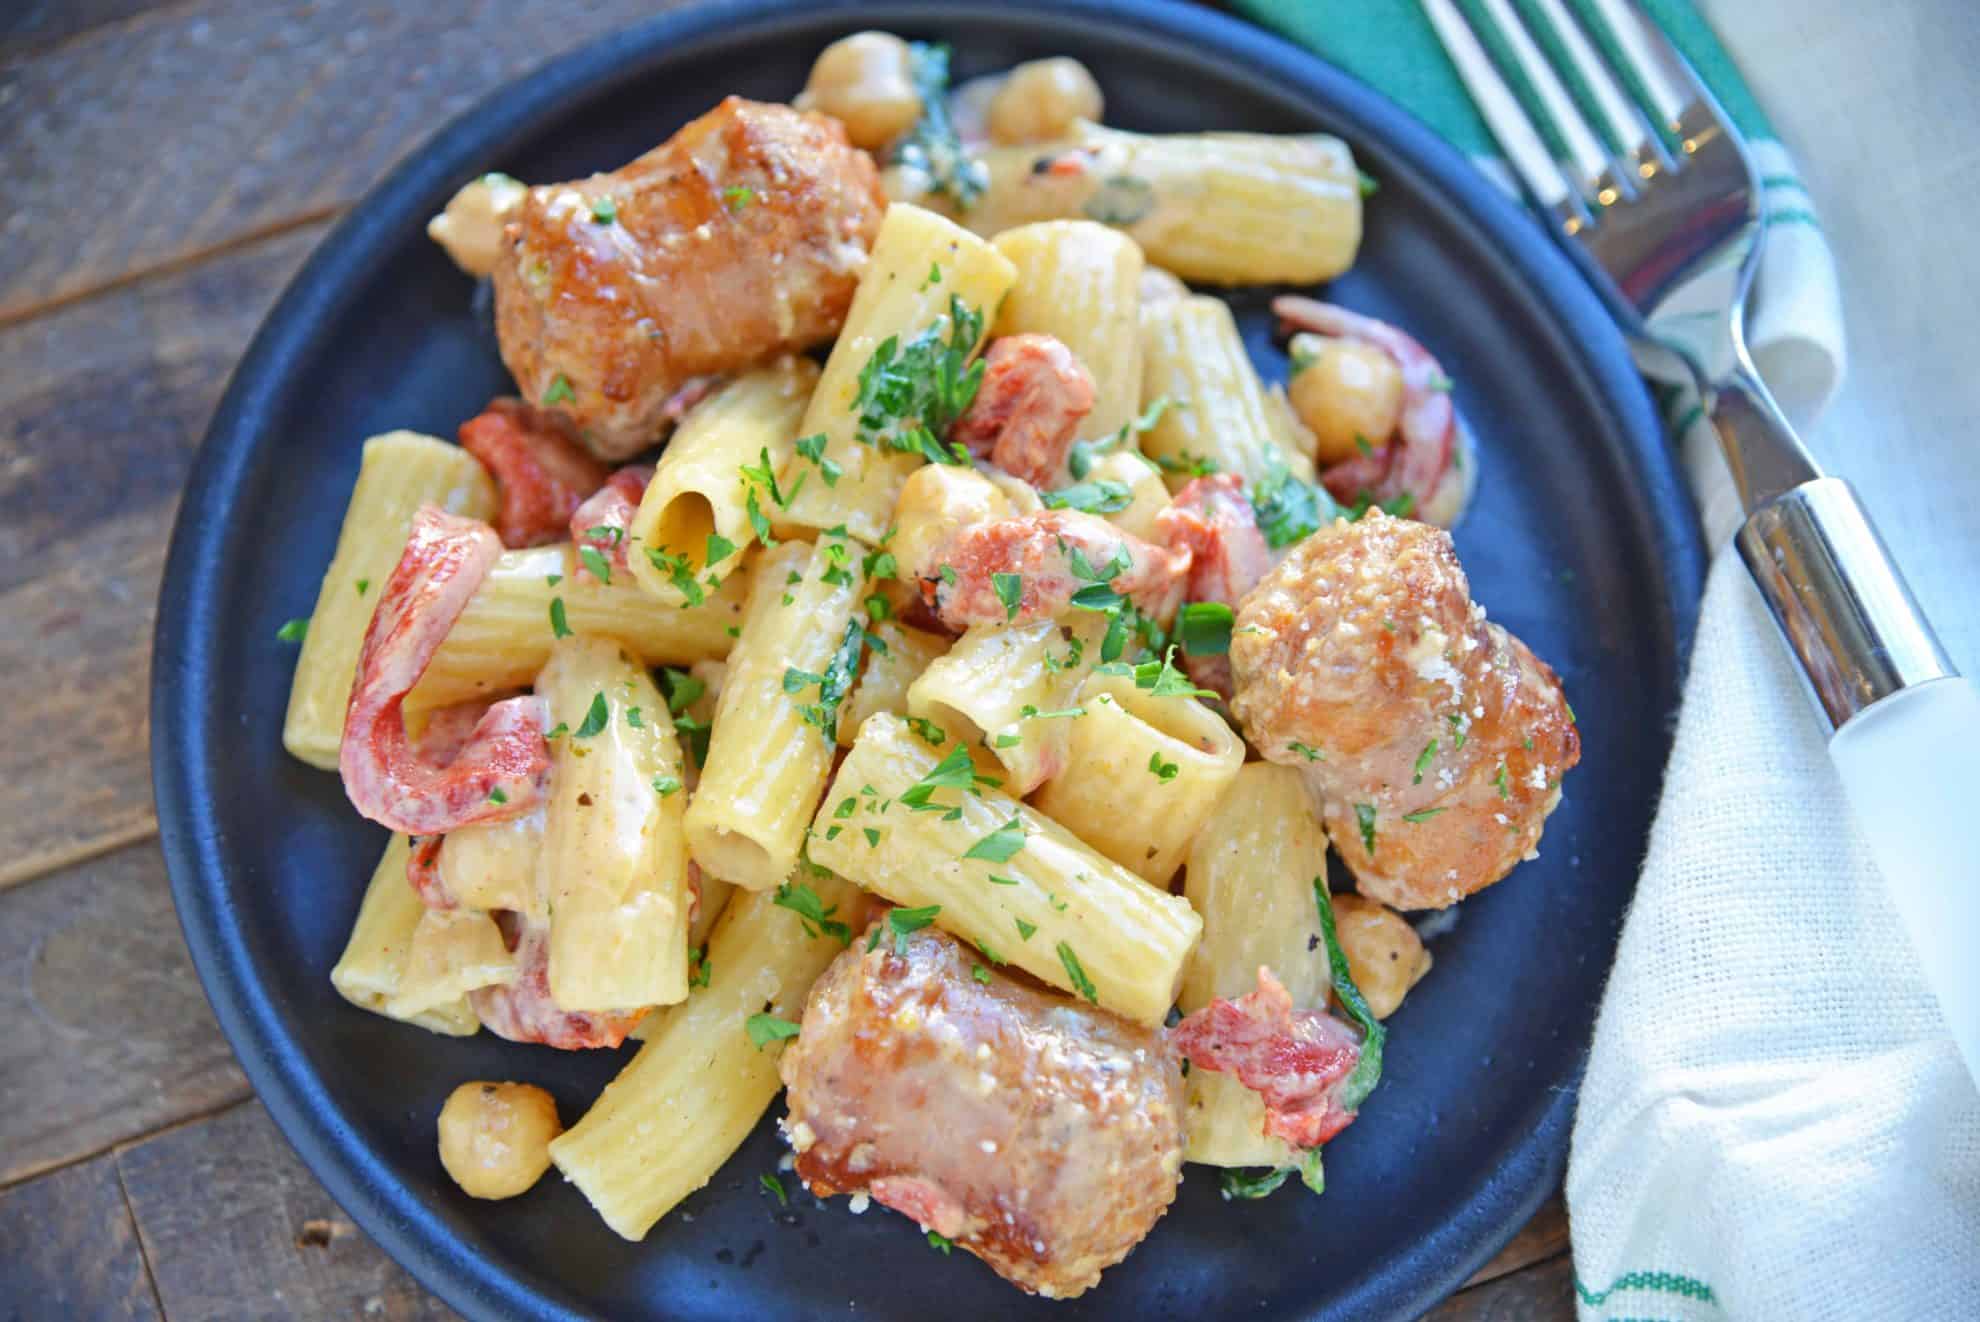 This delicious One-Pan Sausage Alfredo Pasta is an easy weeknight meal with instructions on how to make homemade alfredo sauce. So simple and good! #alfredosauce #alfredopasta www.savoryexperiments.com 